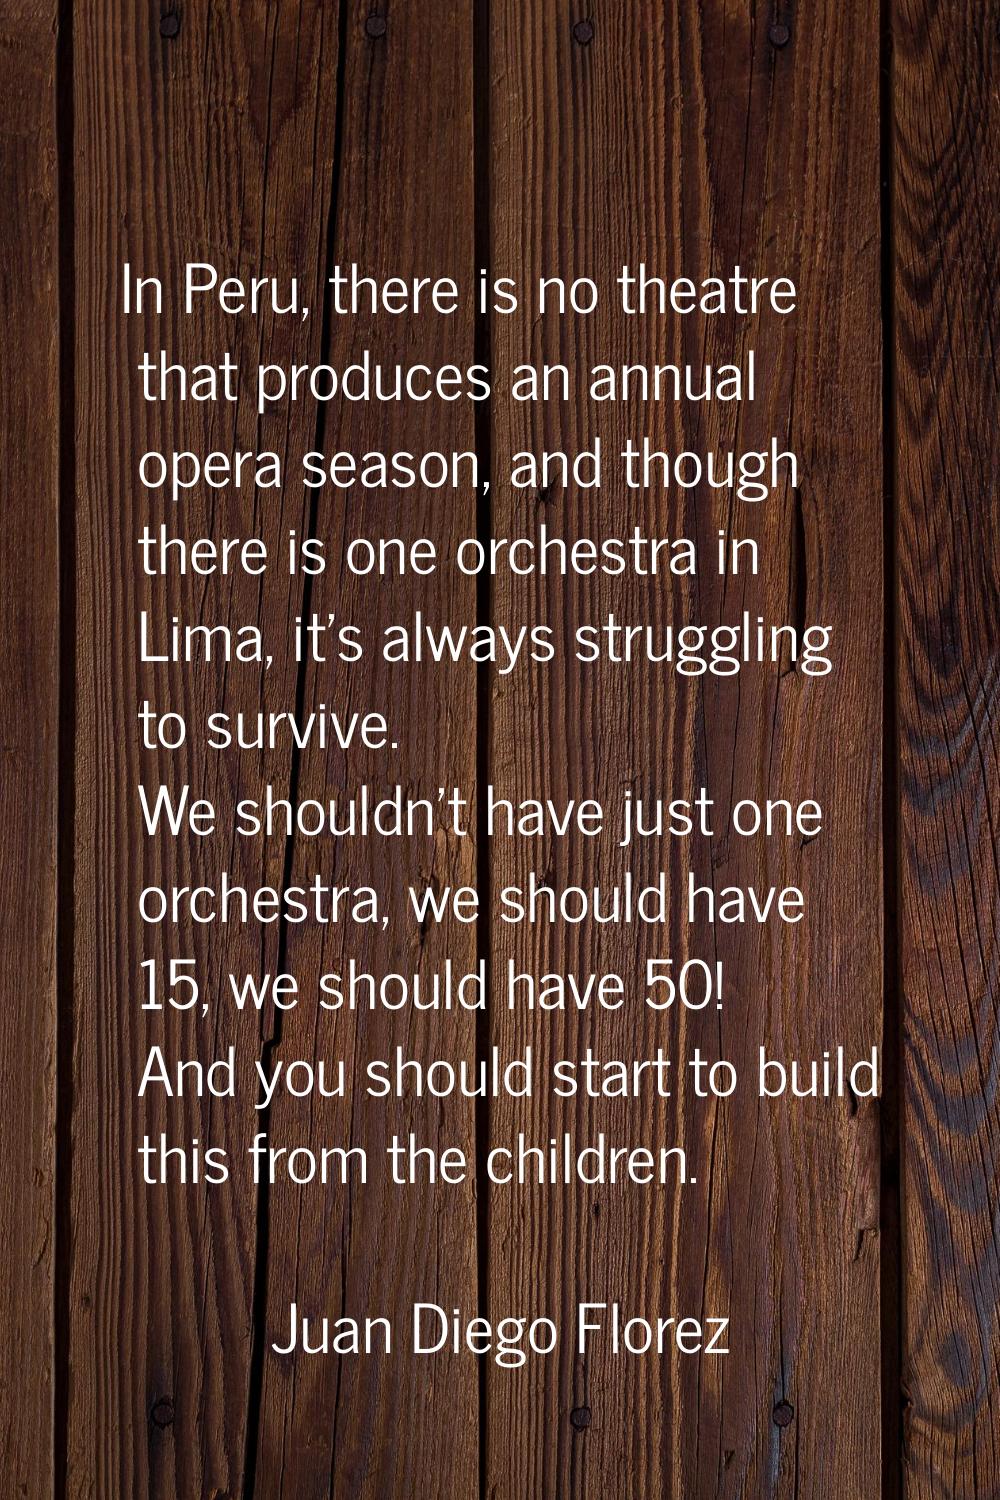 In Peru, there is no theatre that produces an annual opera season, and though there is one orchestr